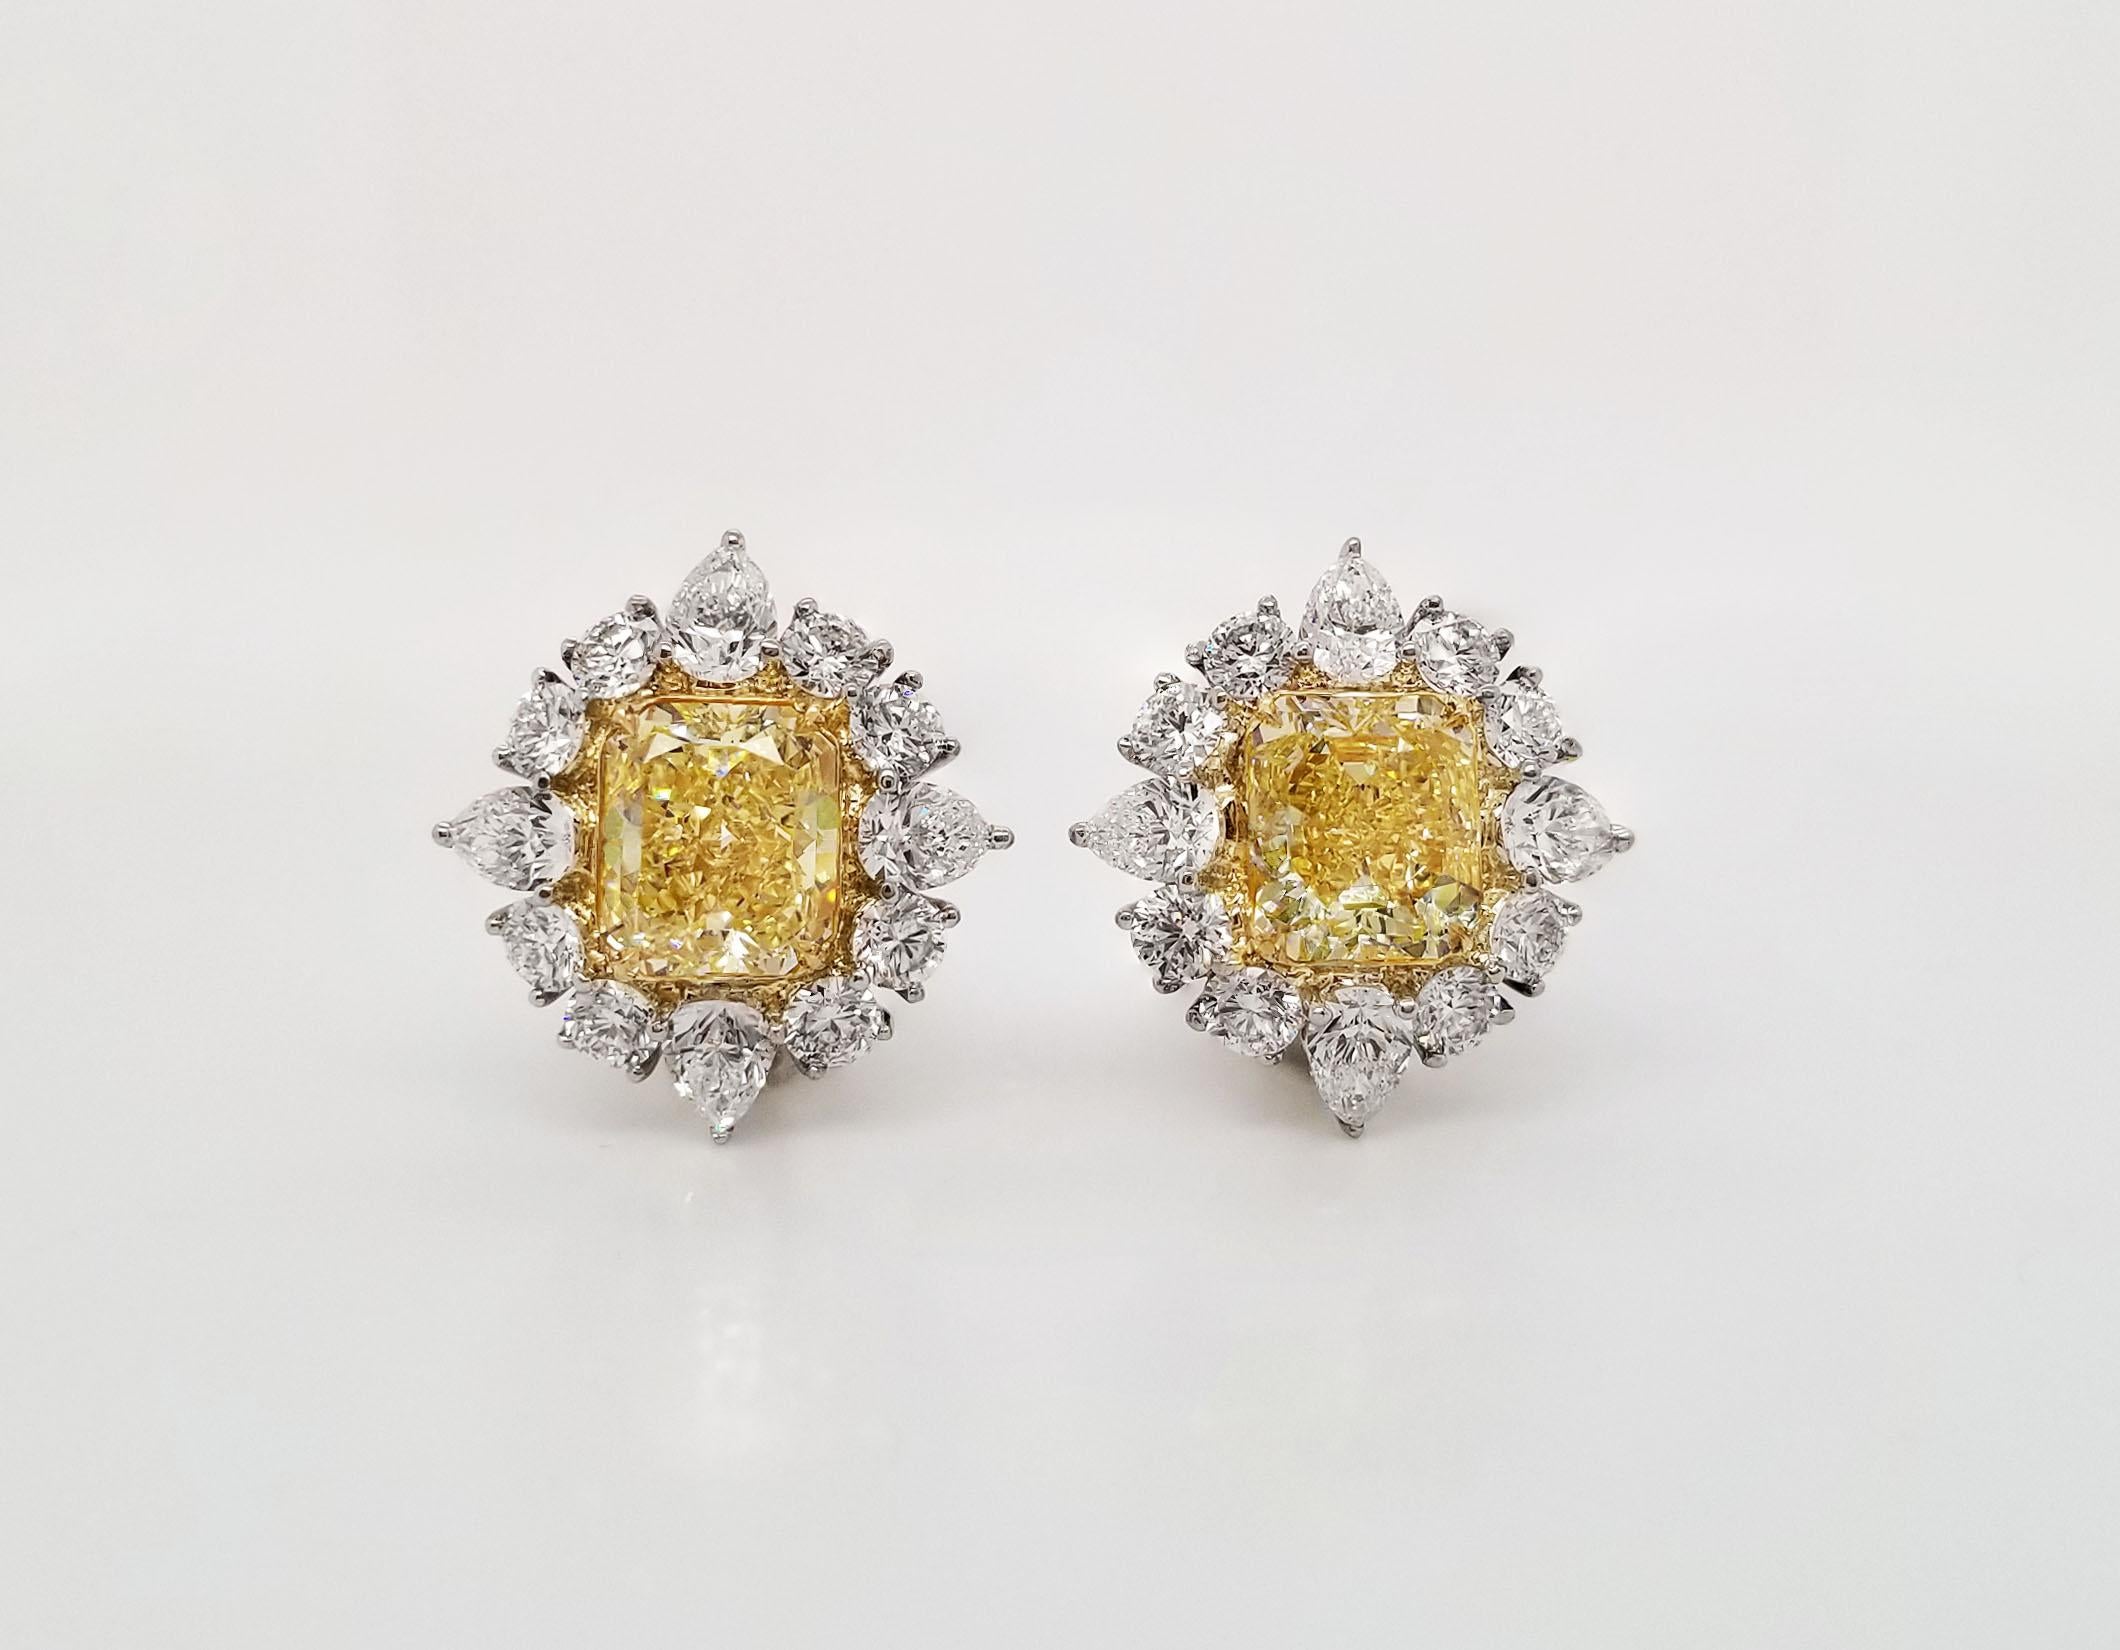 From the outstanding Scarselli's Intense Yellow diamonds collection, these matching radiant cut 3 carats each VVS/VS clarity GIA certified (see certificate pictures for detailed center stones' information), beautifully mounted on an 18 karat yellow